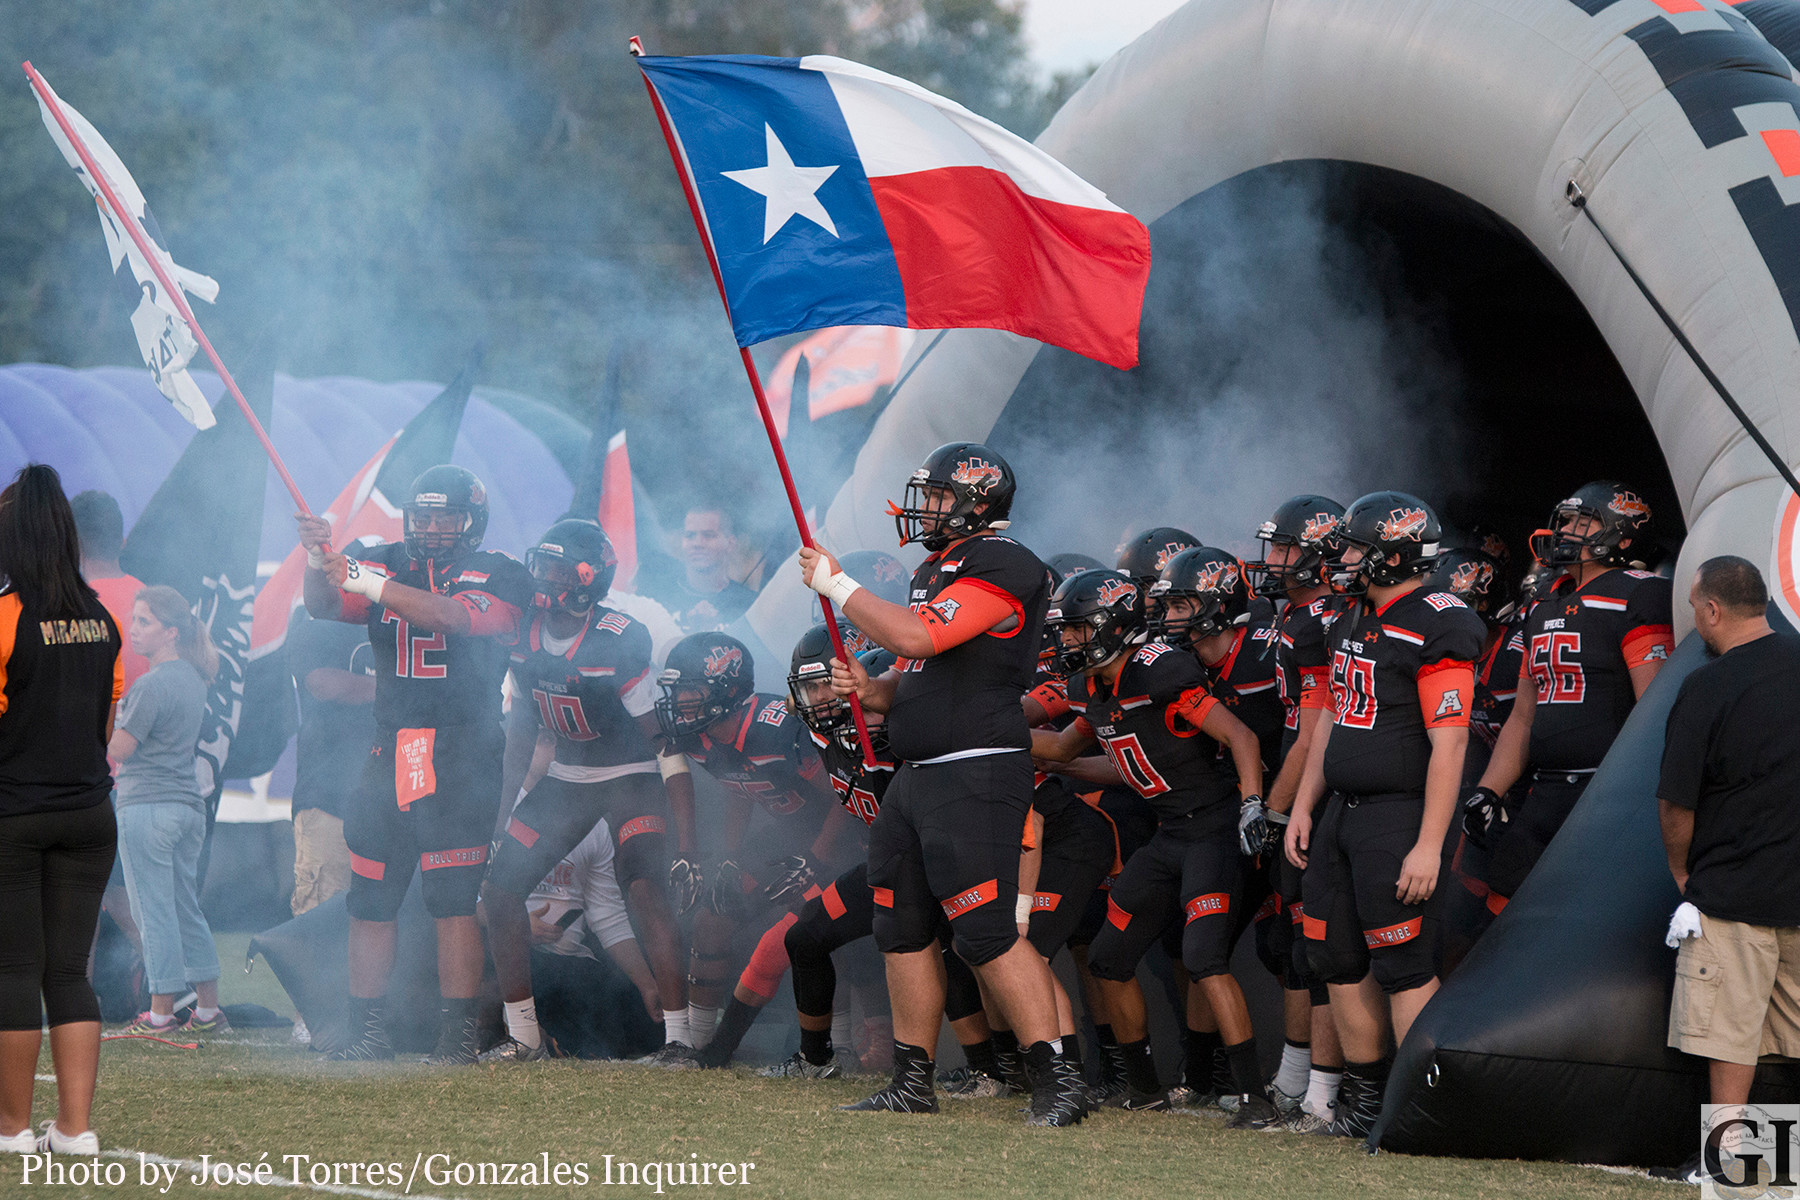 Rivalry games always add some “extra juice,” as head coach Kodi Crane calls it. Tonight will be no different as the Apaches take on the Gobblers in Cuero for their annual show down.